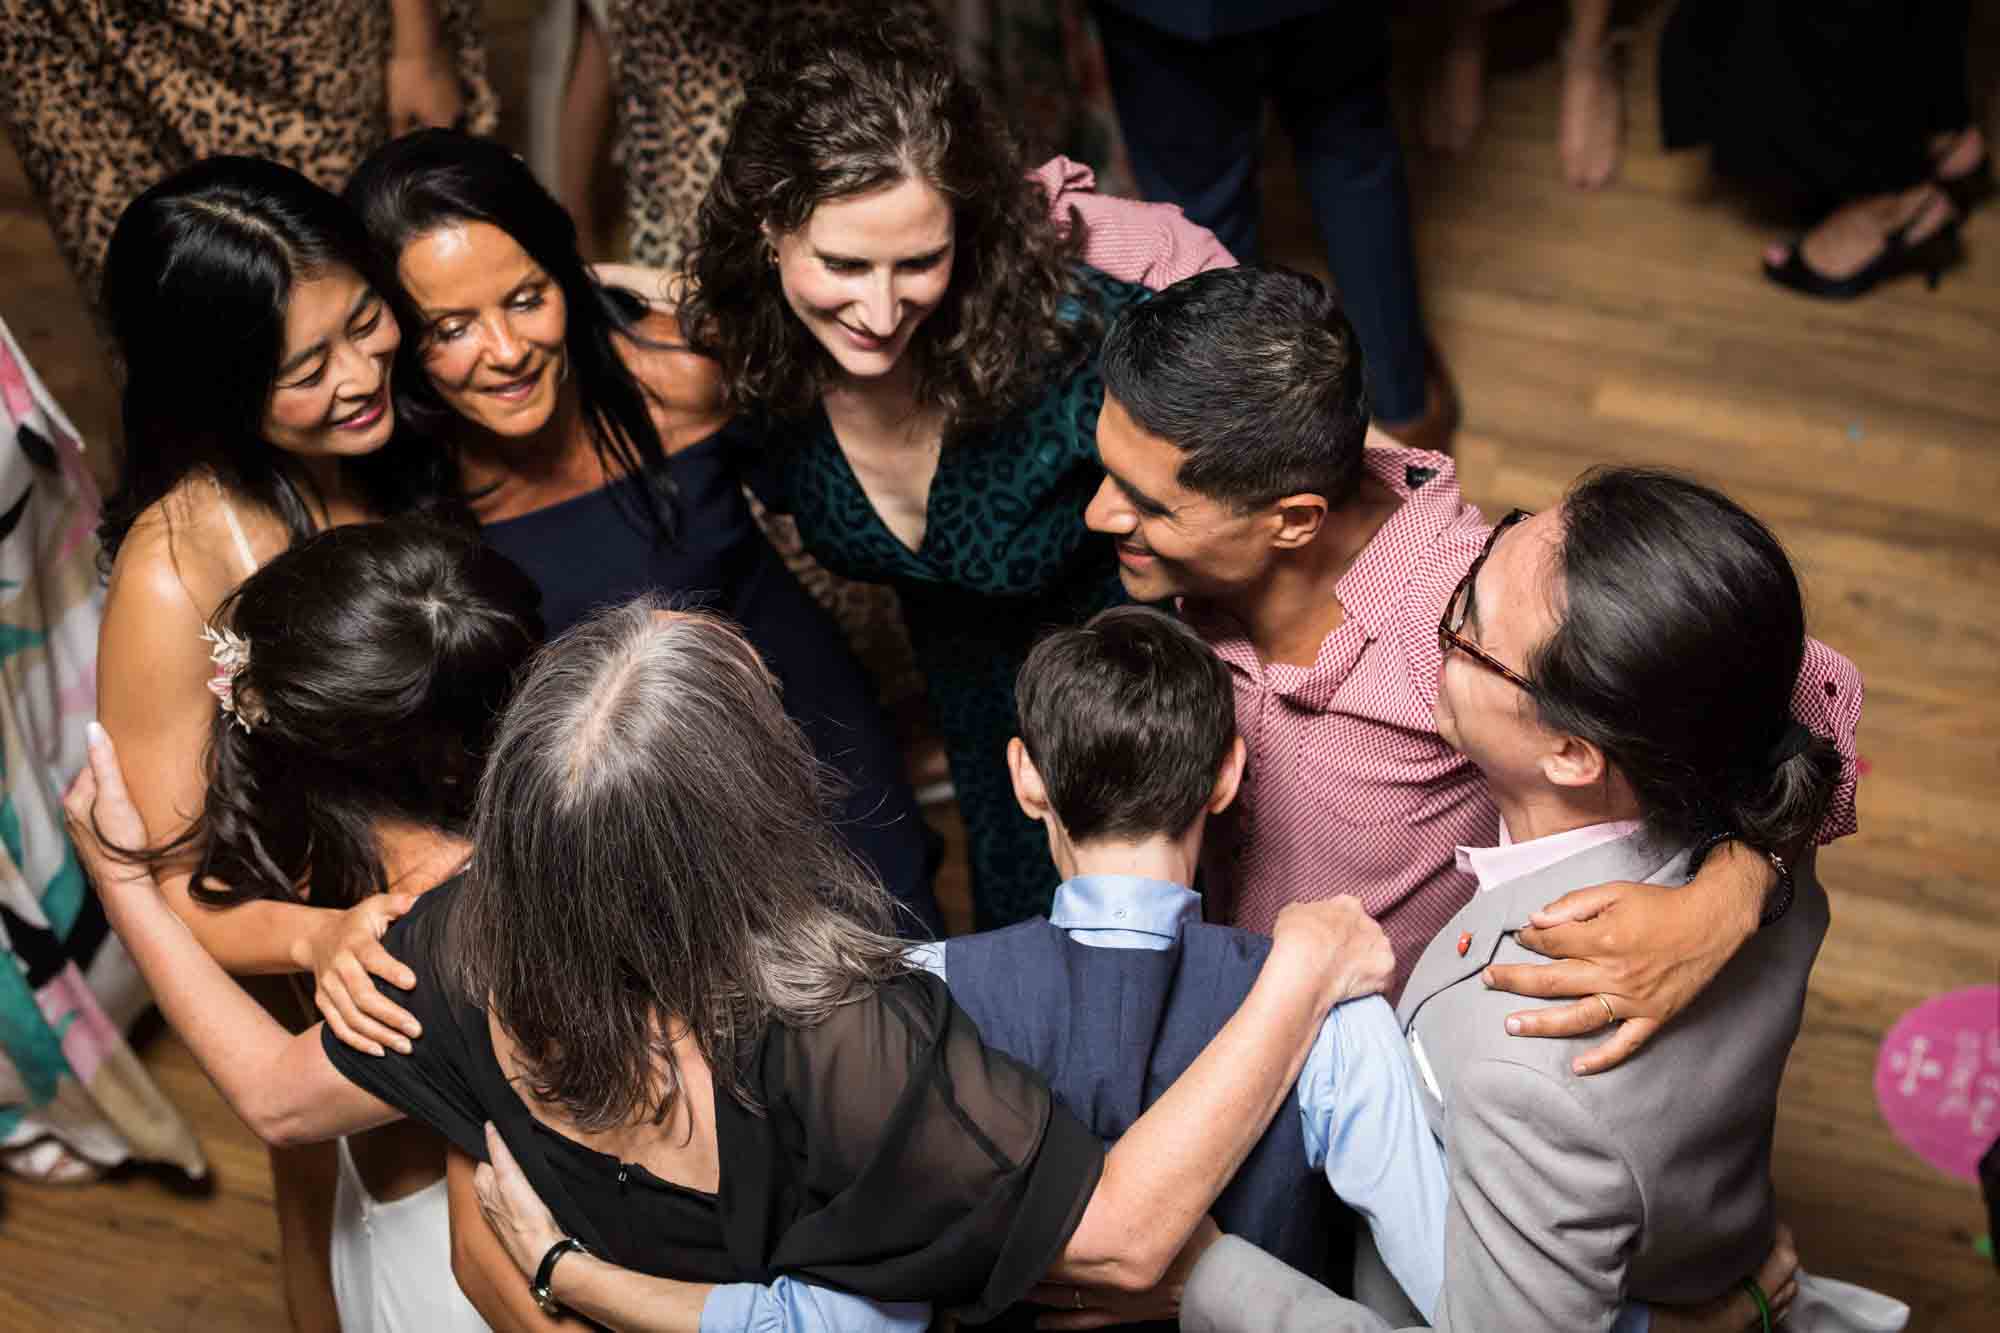 Guests dancing in a circle on the dance floor at a Housing Works wedding